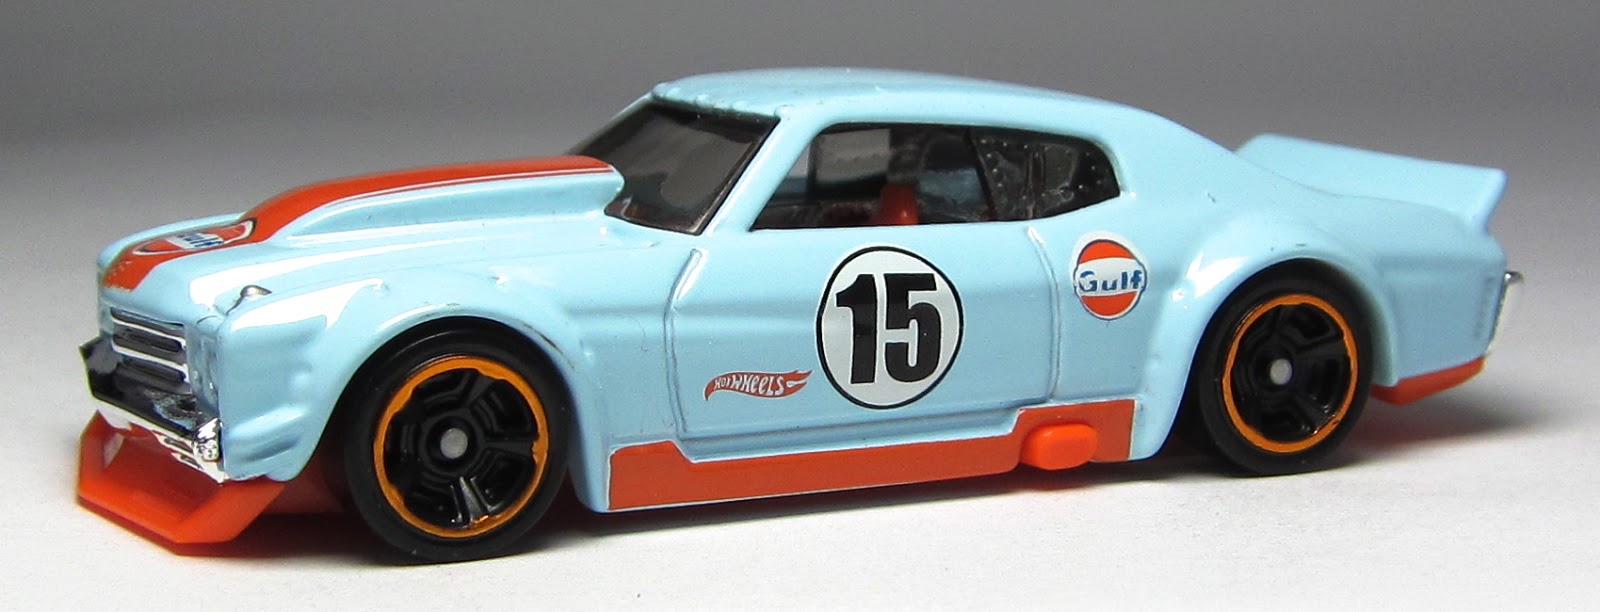 Hot wheels 1:64 Chevy Chevelle 1970 in GULF colours. - already one of my al...